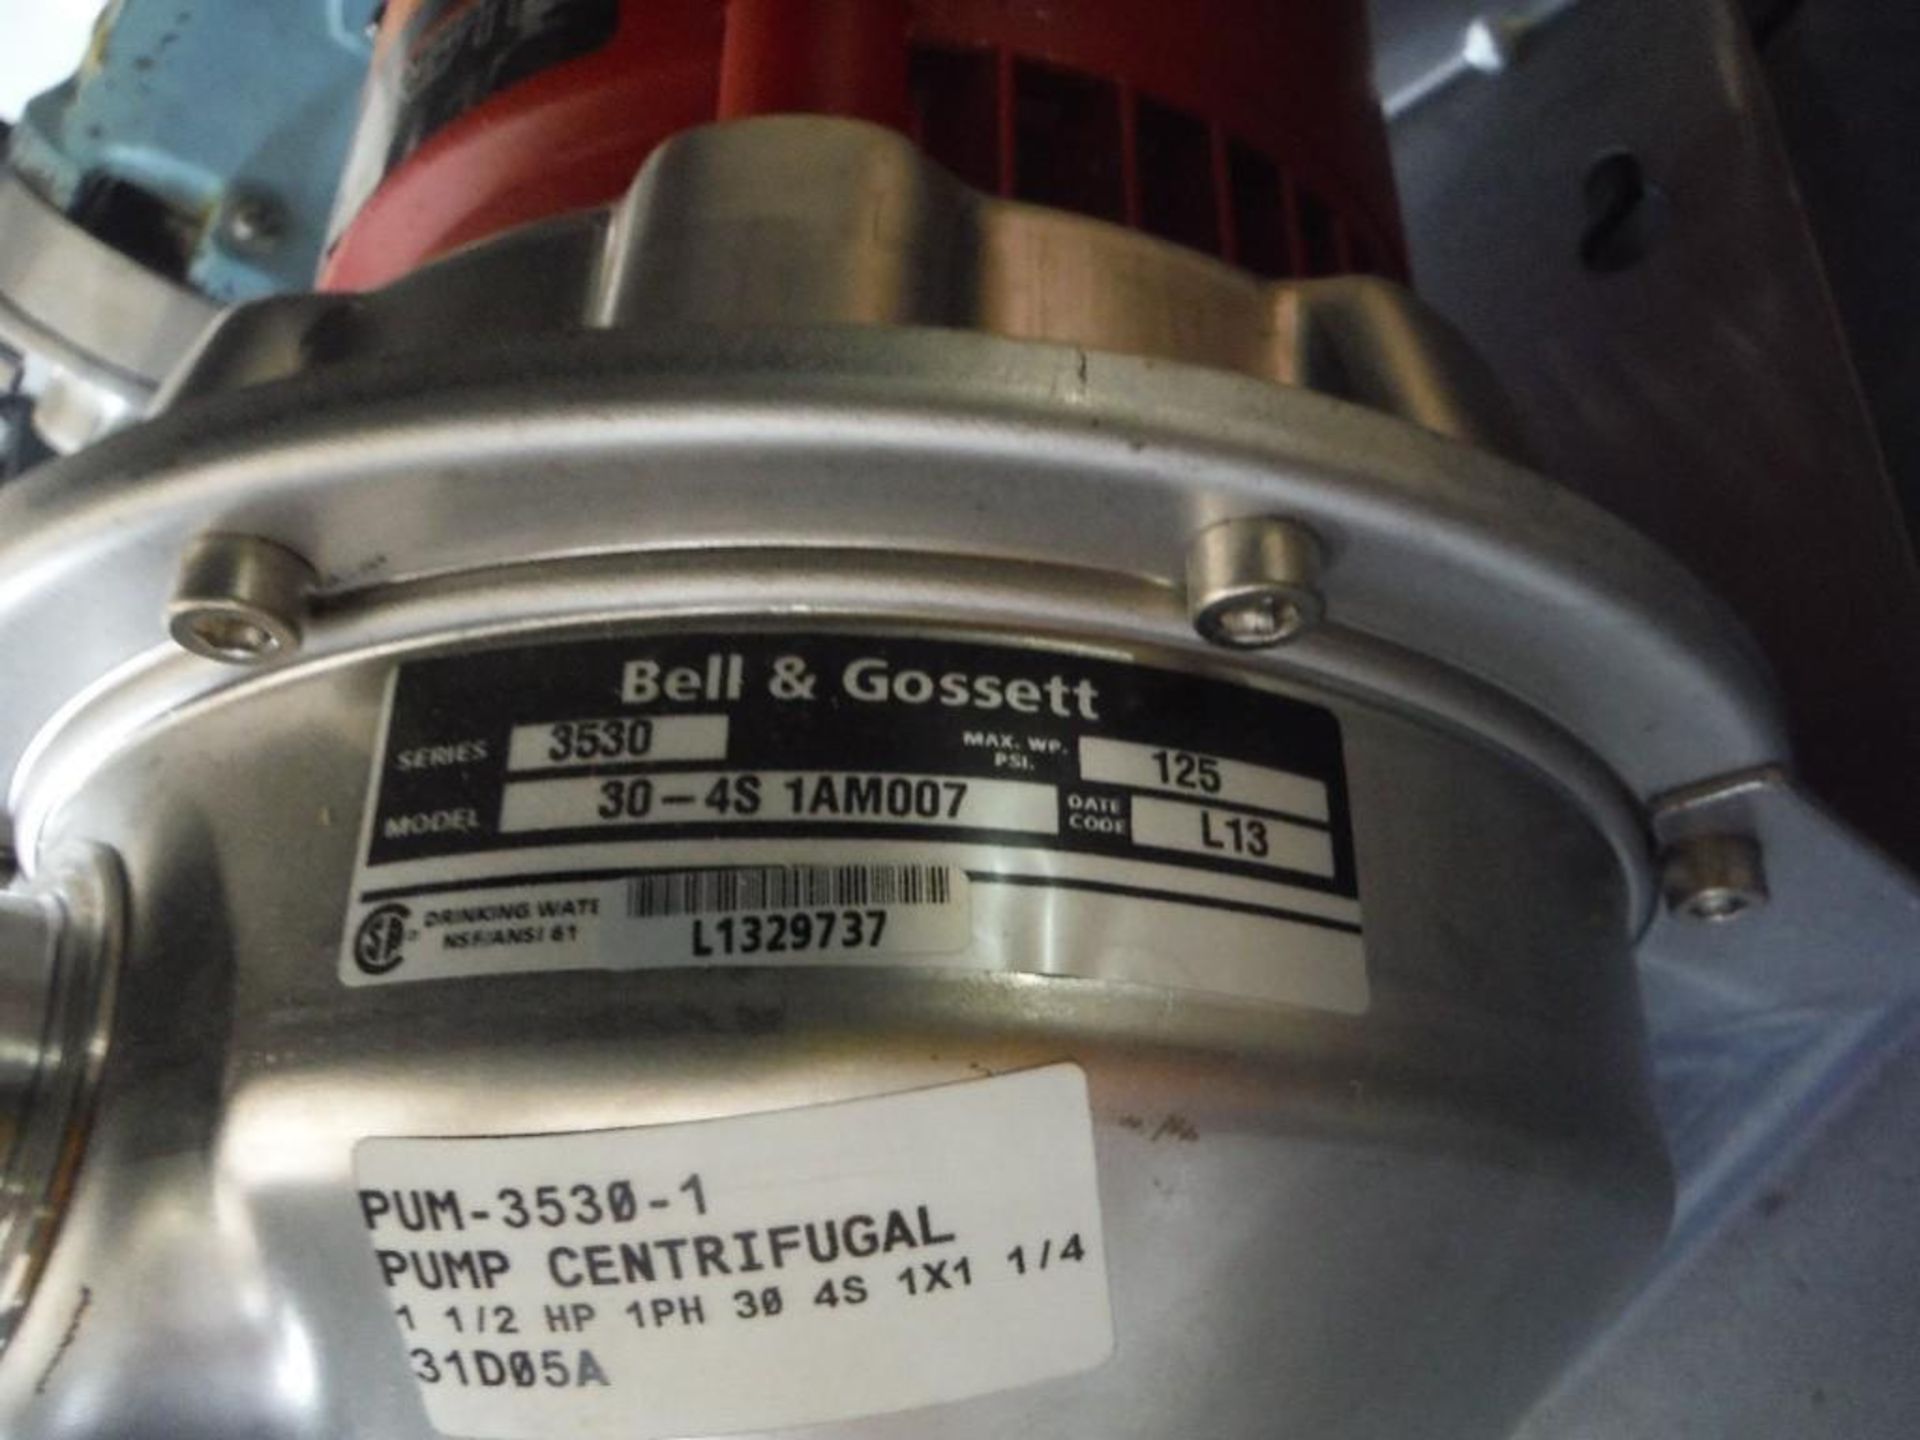 Bell and Gossett centrifugal pump, Model 30-4S AM007, Series 3530, 1 x 1.25 in., 1.5 hp motor - Rigg - Image 4 of 4